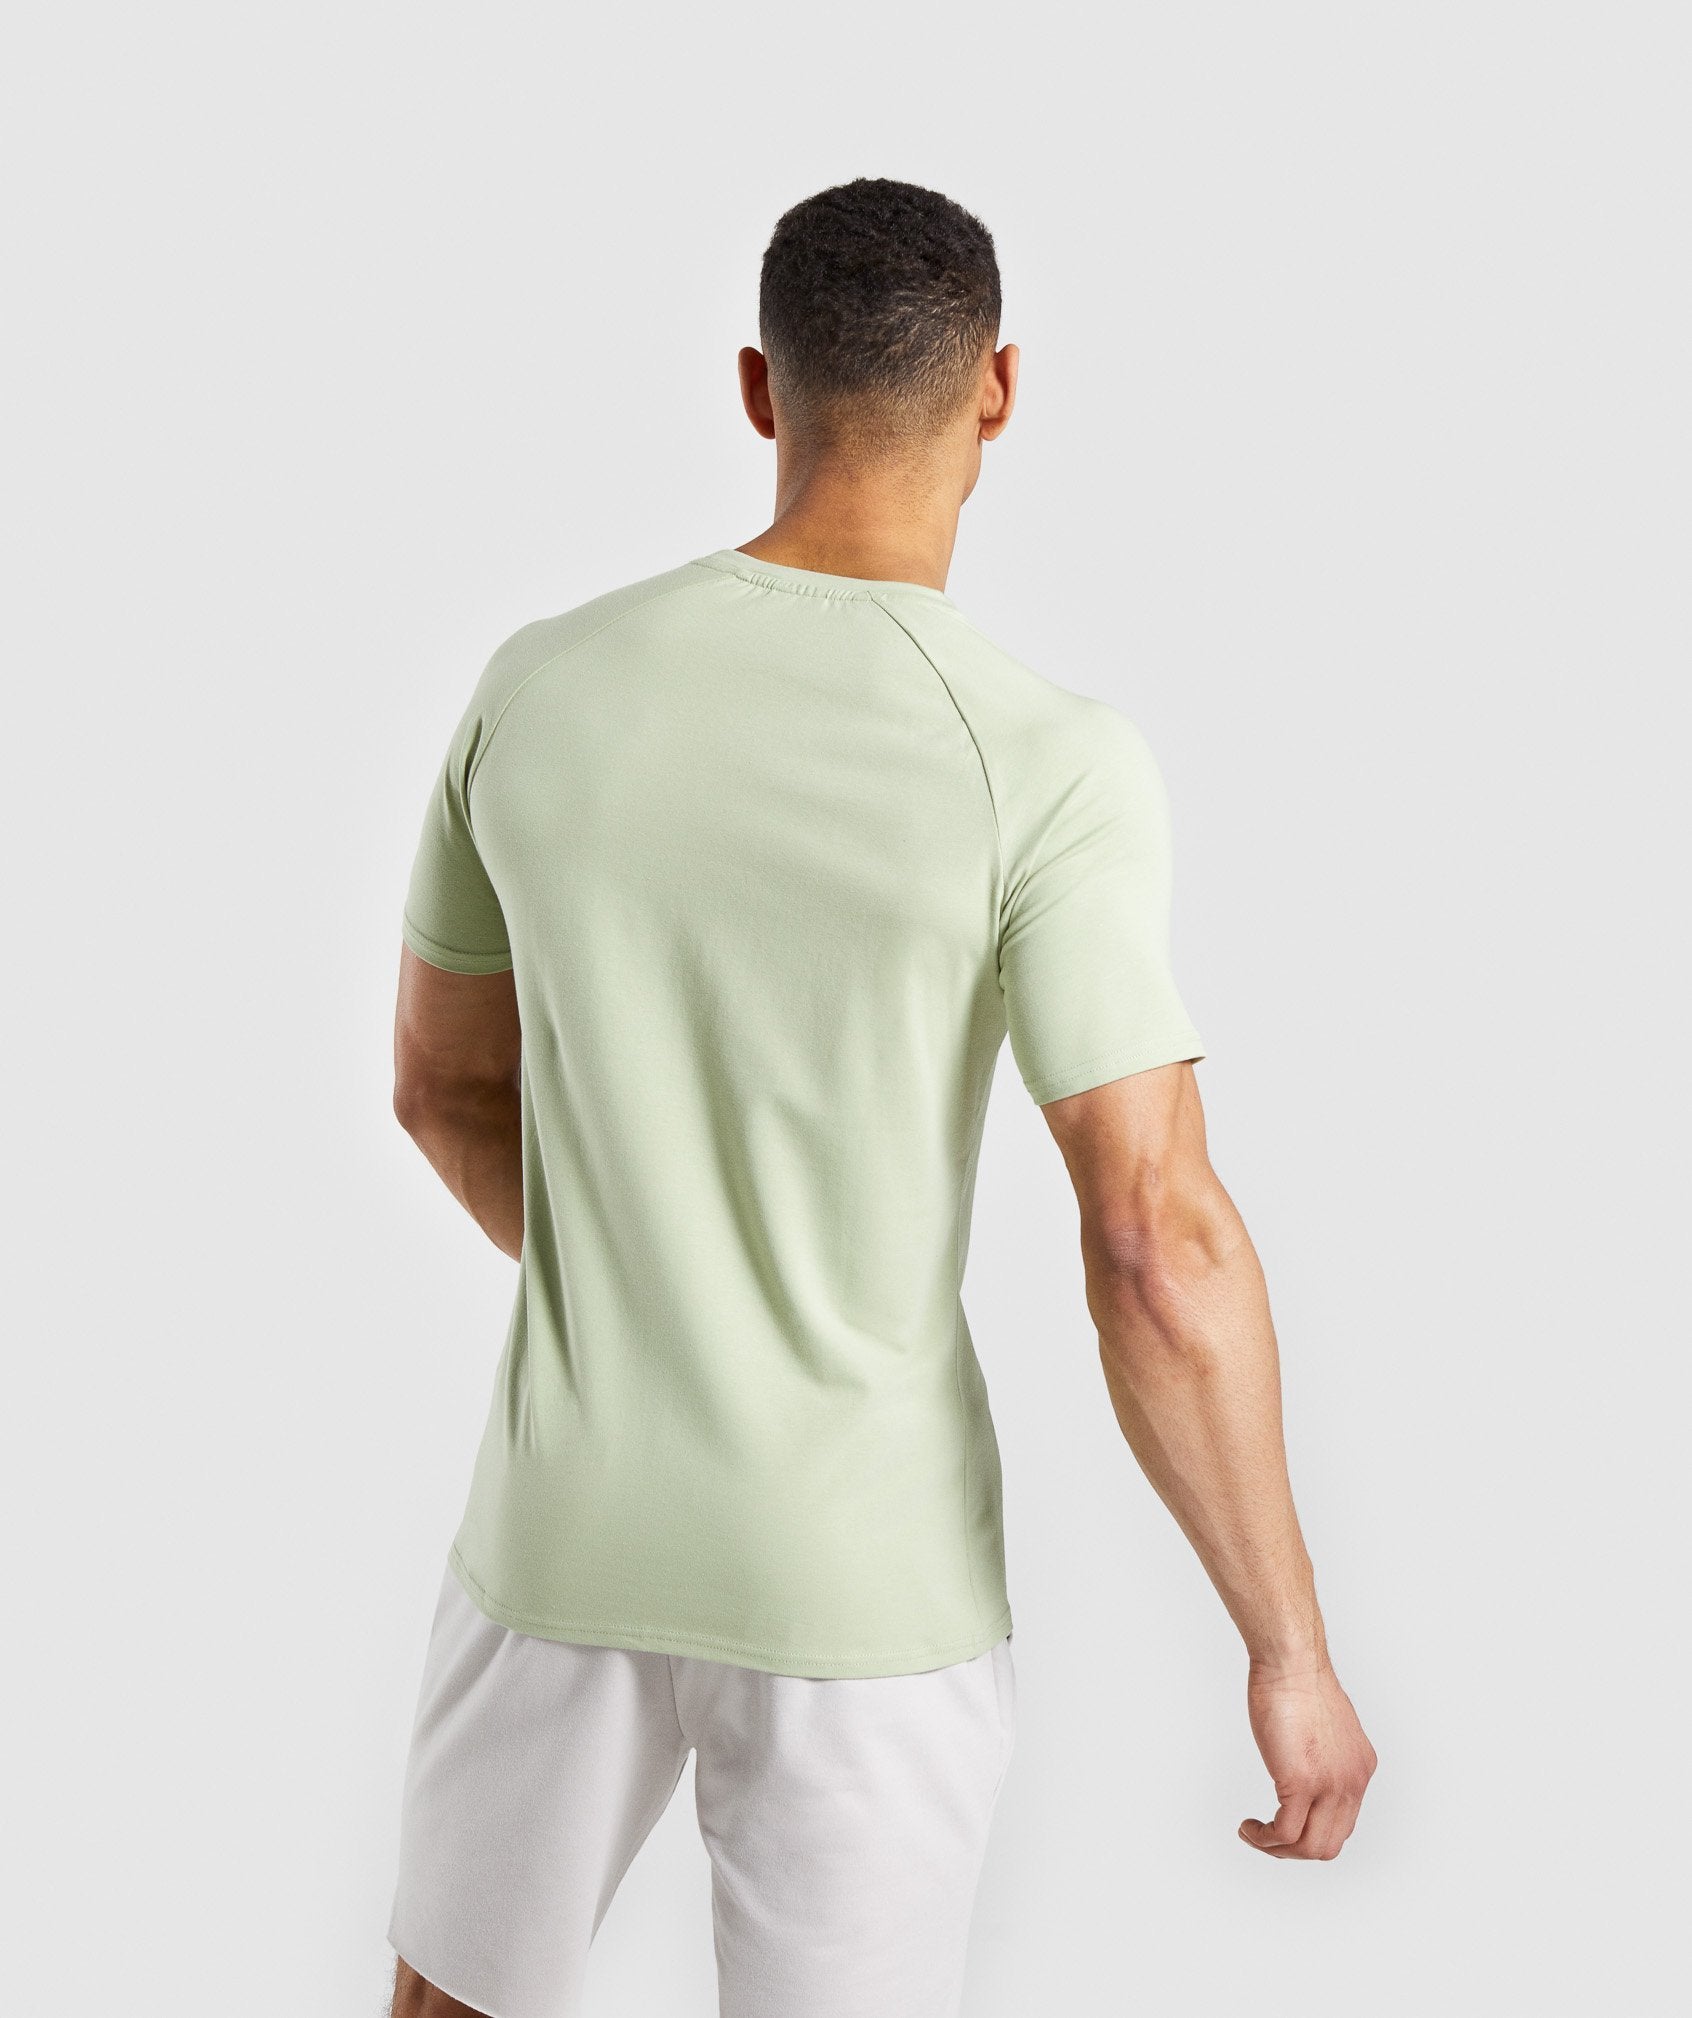 Apollo T-Shirt in Green - view 2